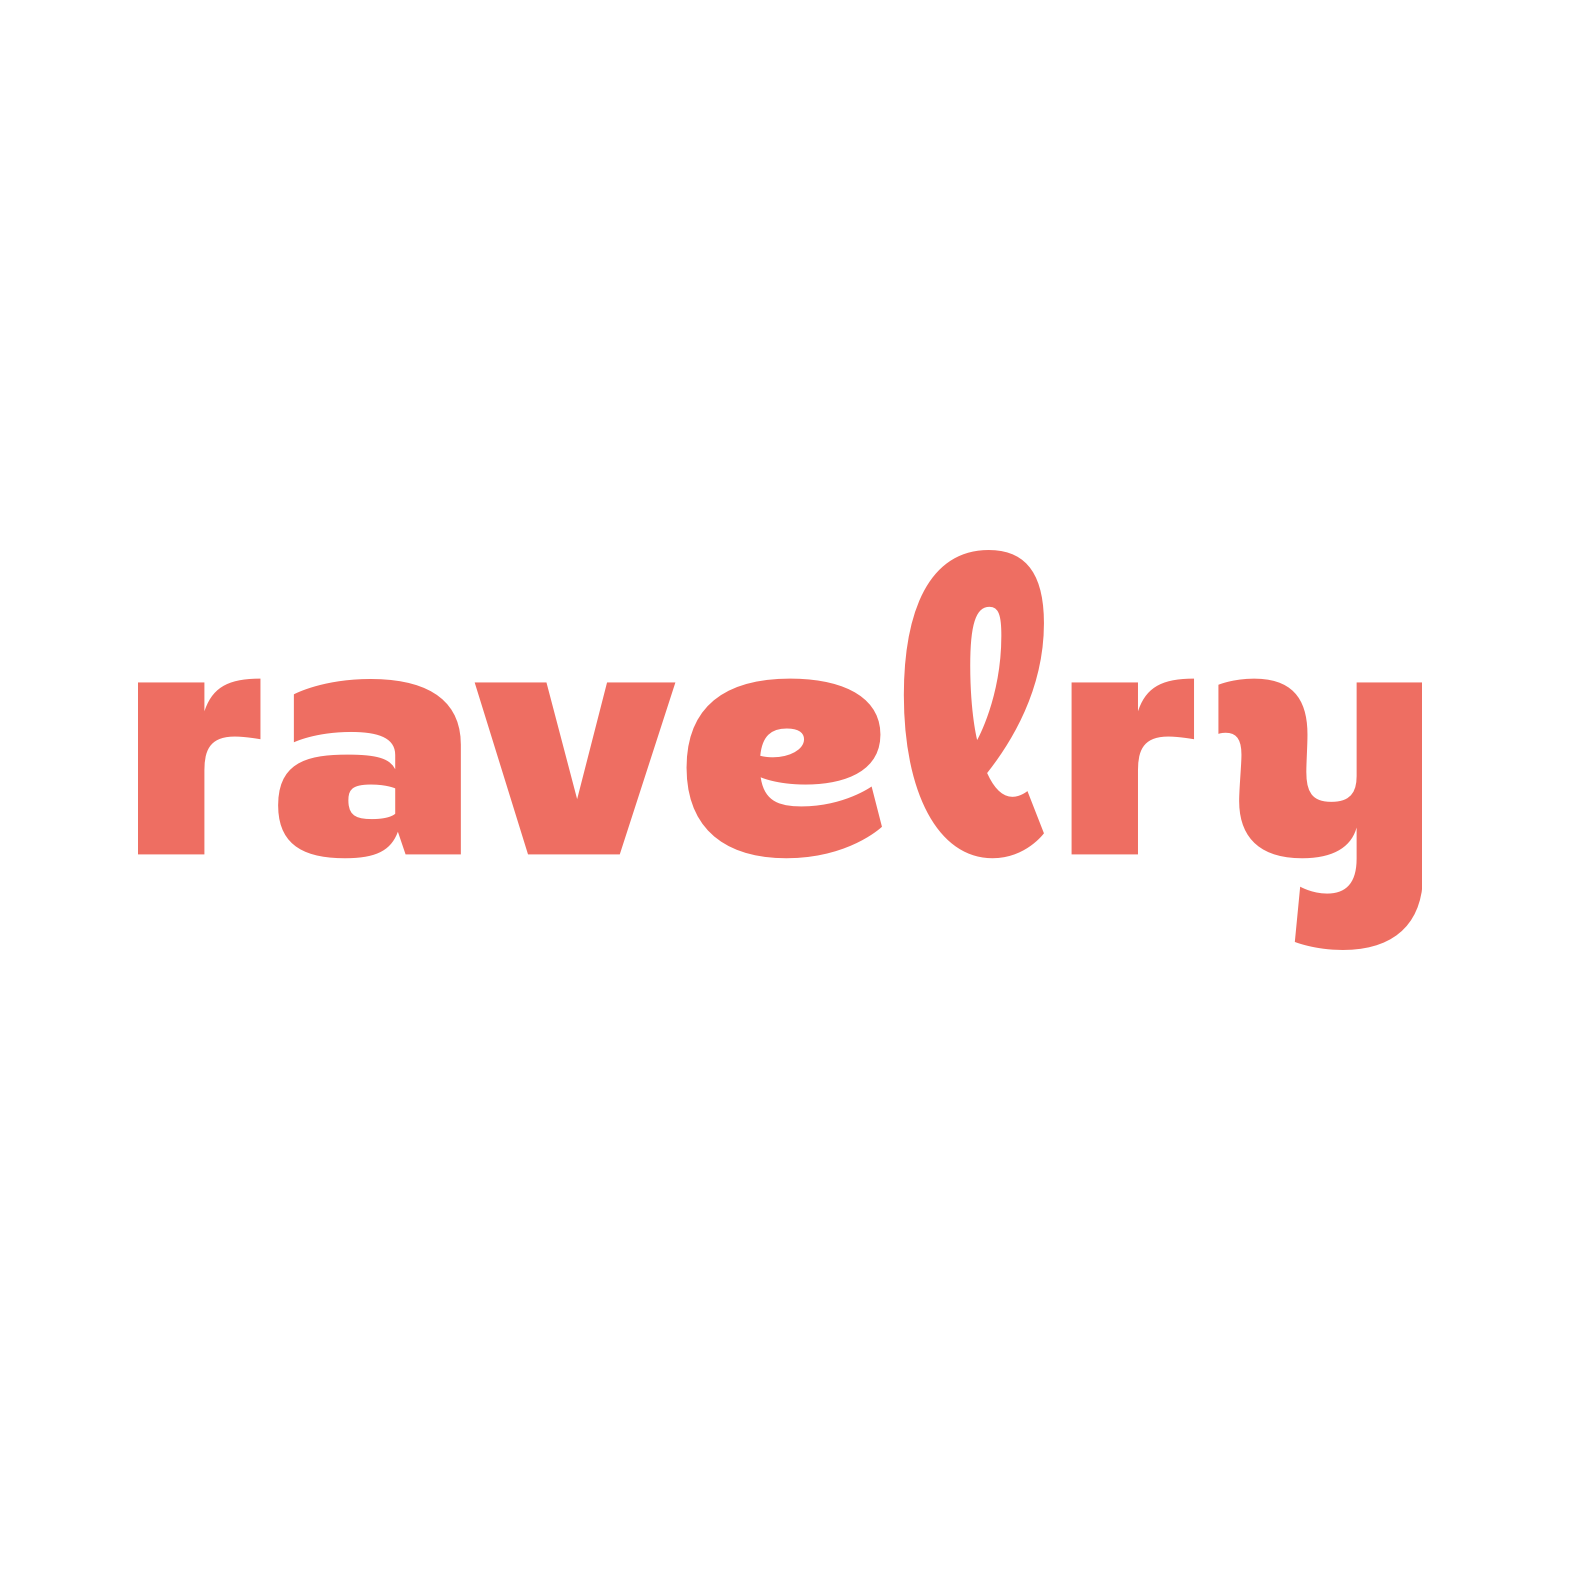 Ravelry, getting started